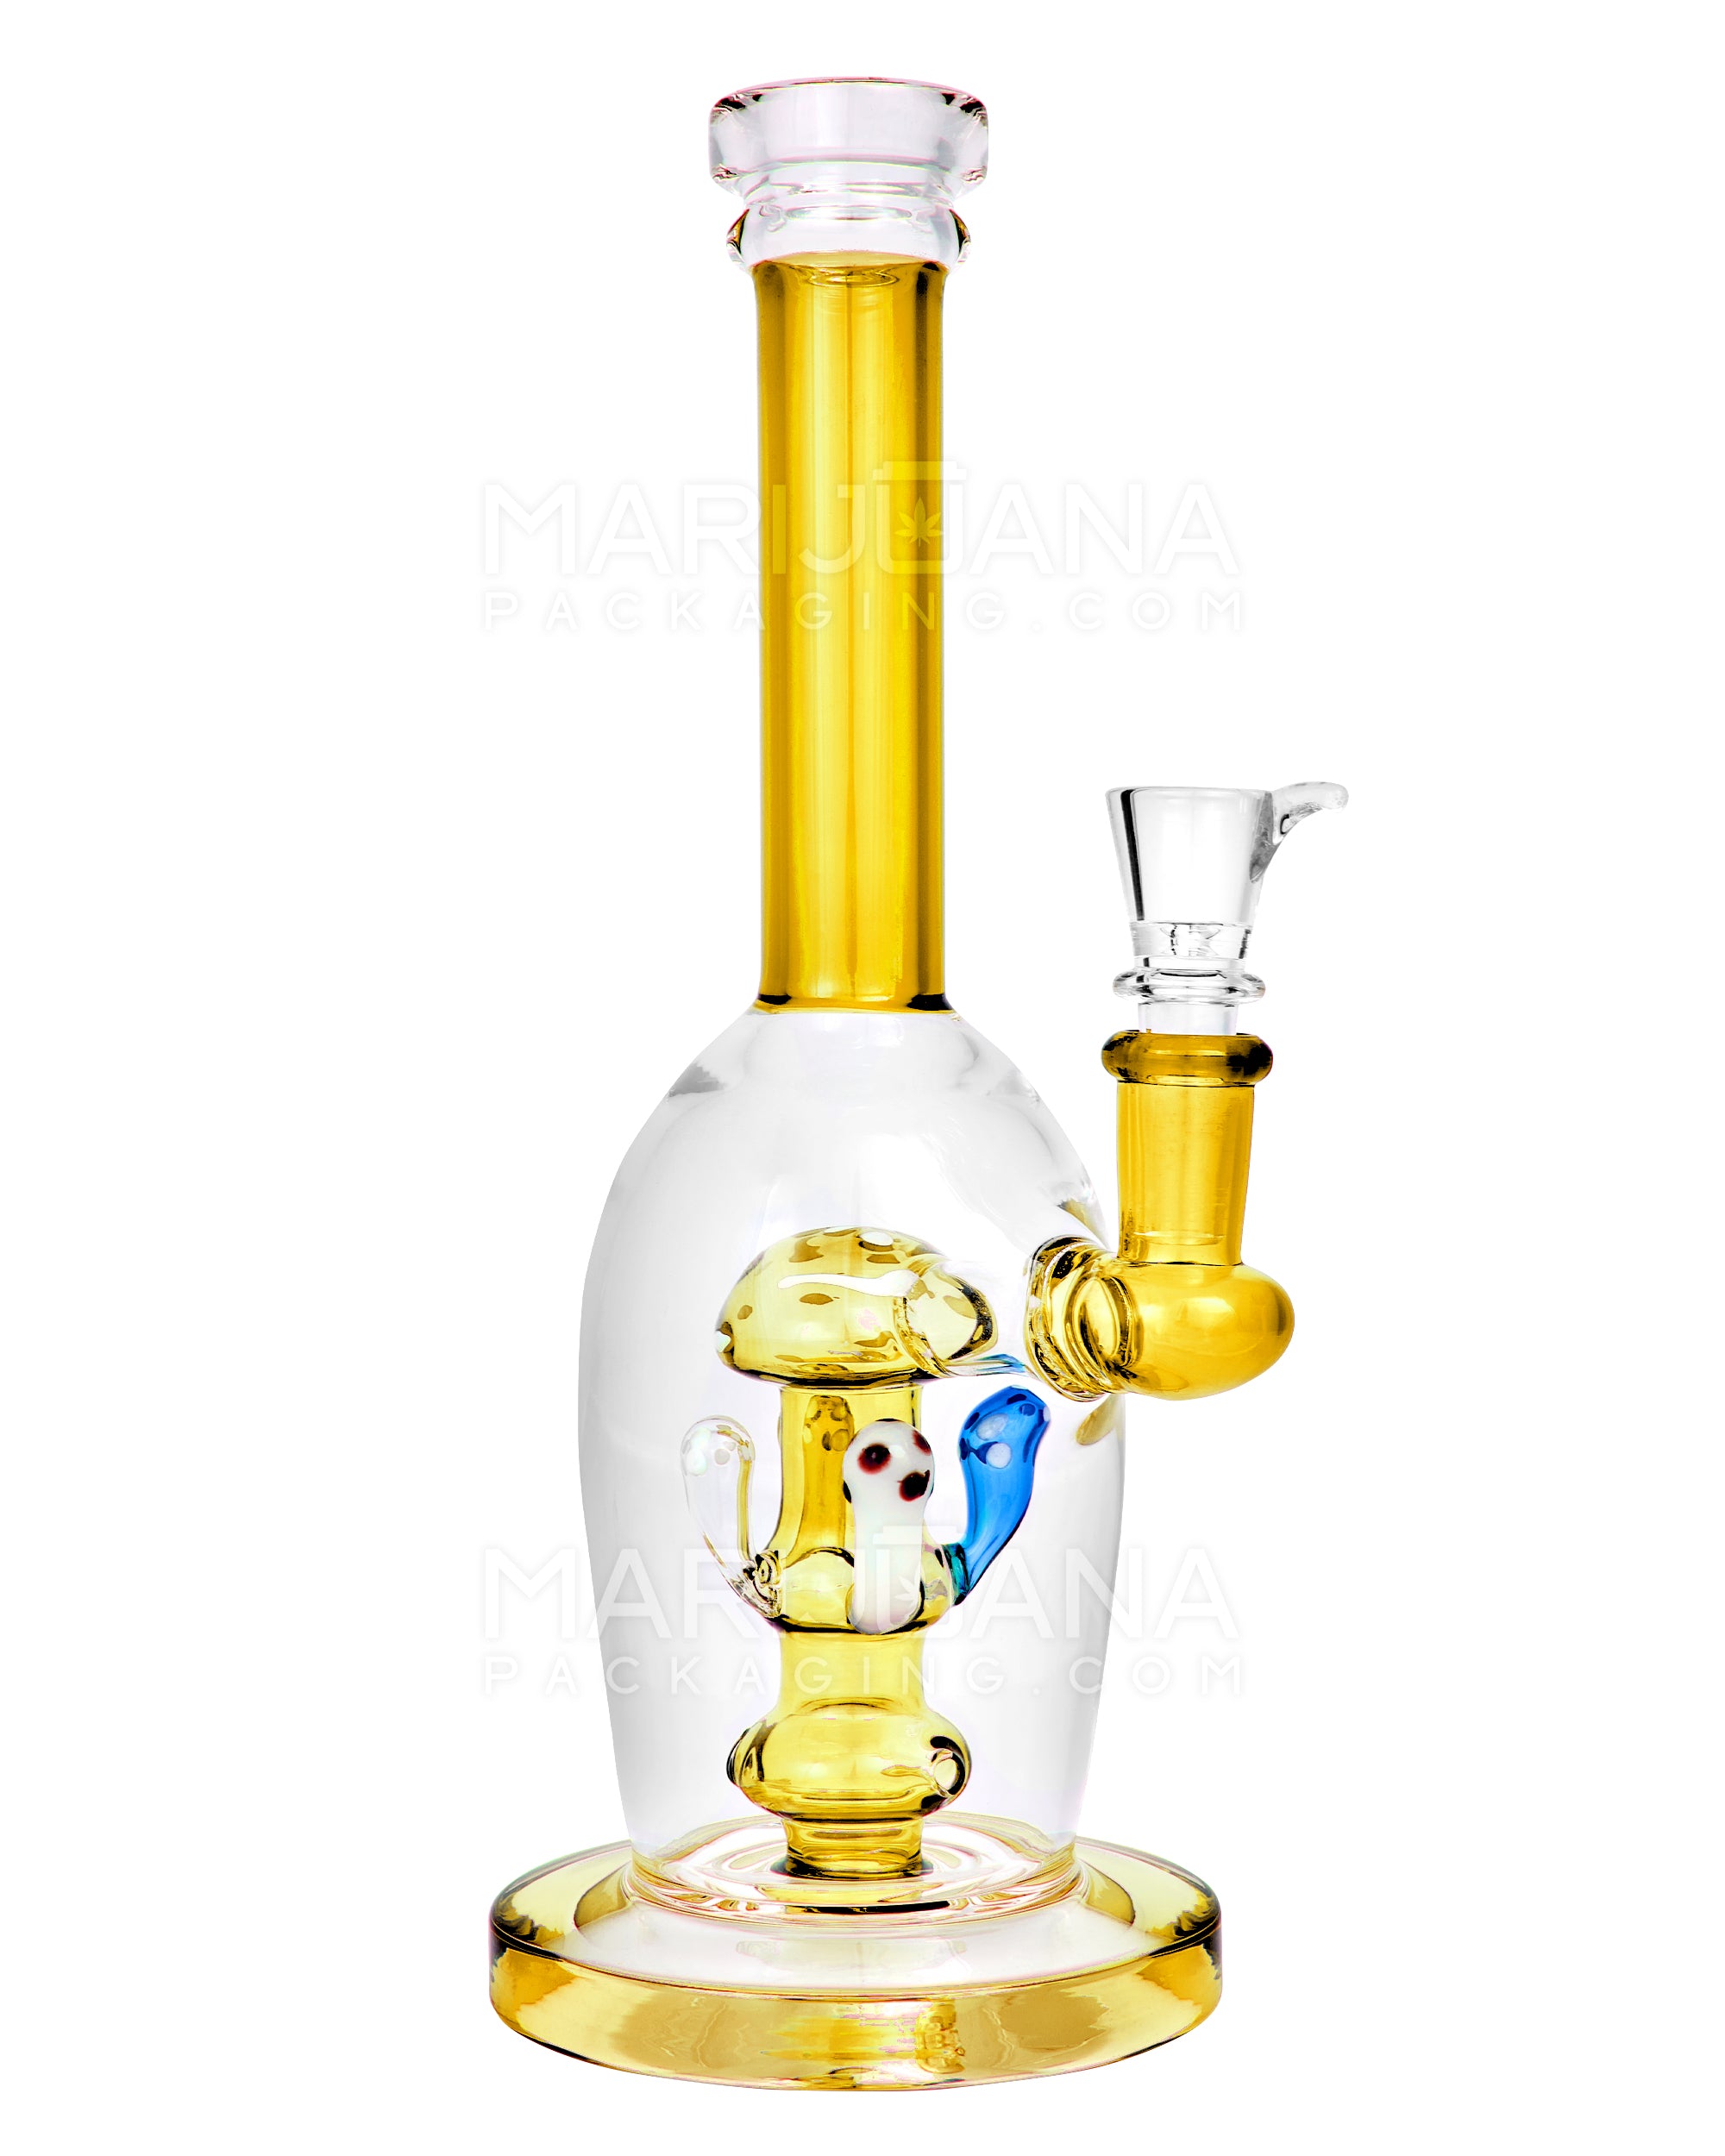 Straight Neck Mushroom Perc Glass Egg Water Pipe w/ Thick Base | 10.5in Tall - 14mm Bowl - Amber - 1